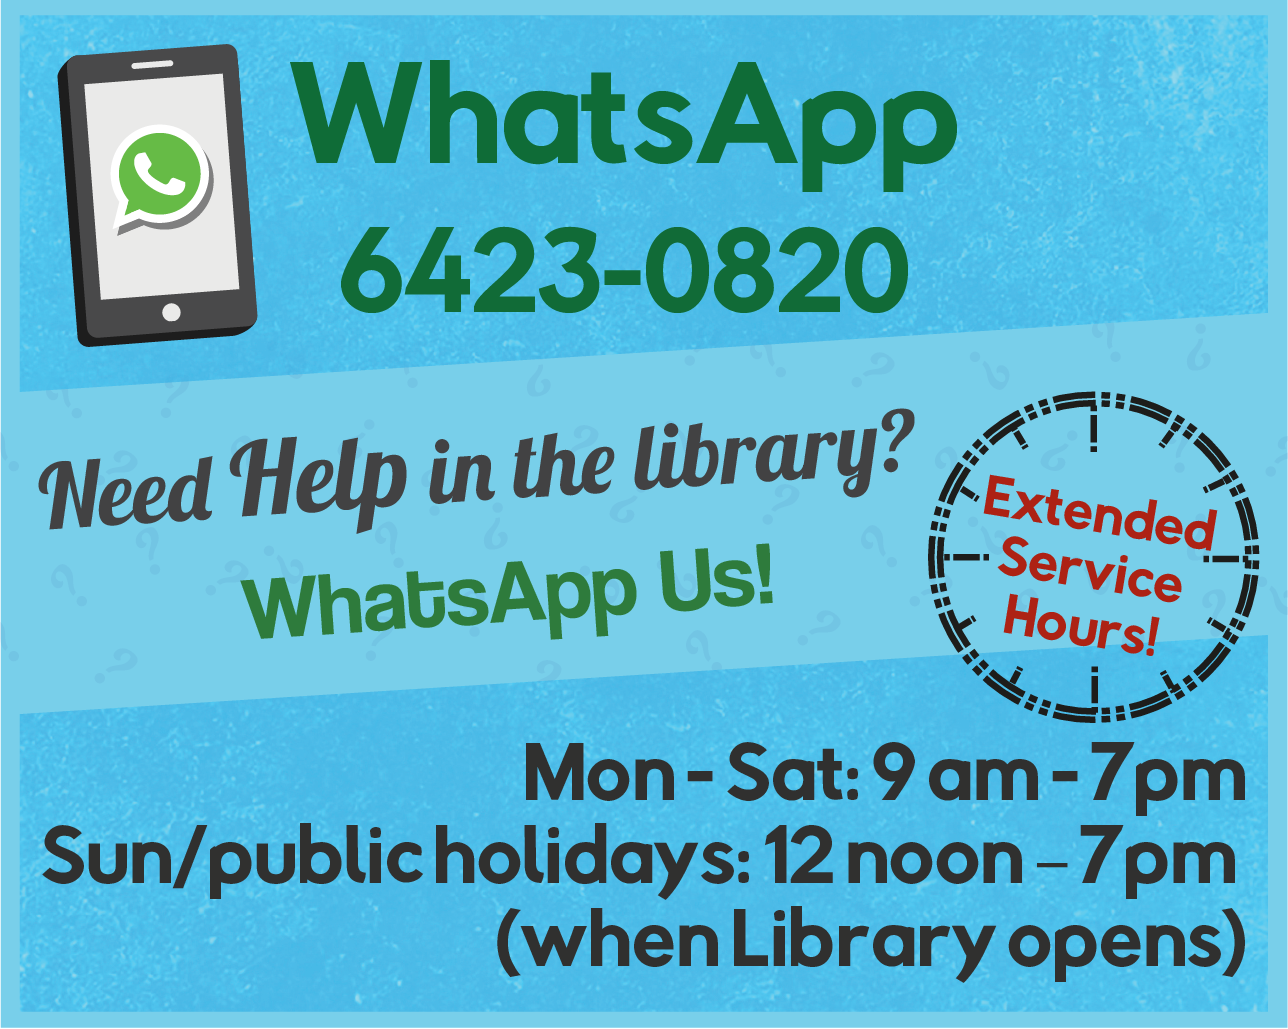 Extension of Library WhatsApp Service Hours